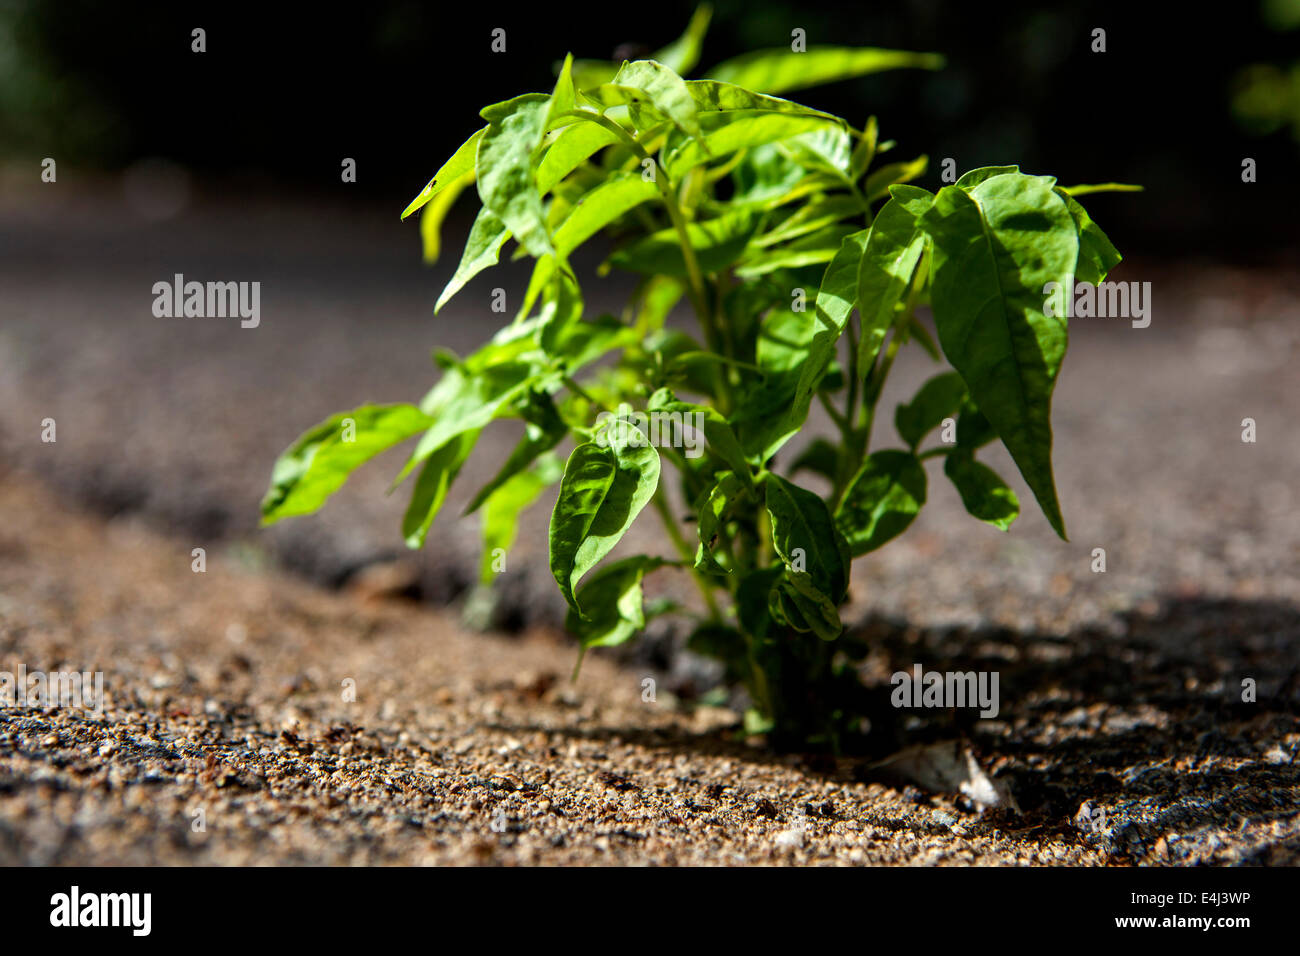 plant growing through pavement, New shoots plant sprouting in cracks, plant shoots emerging strong Stock Photo